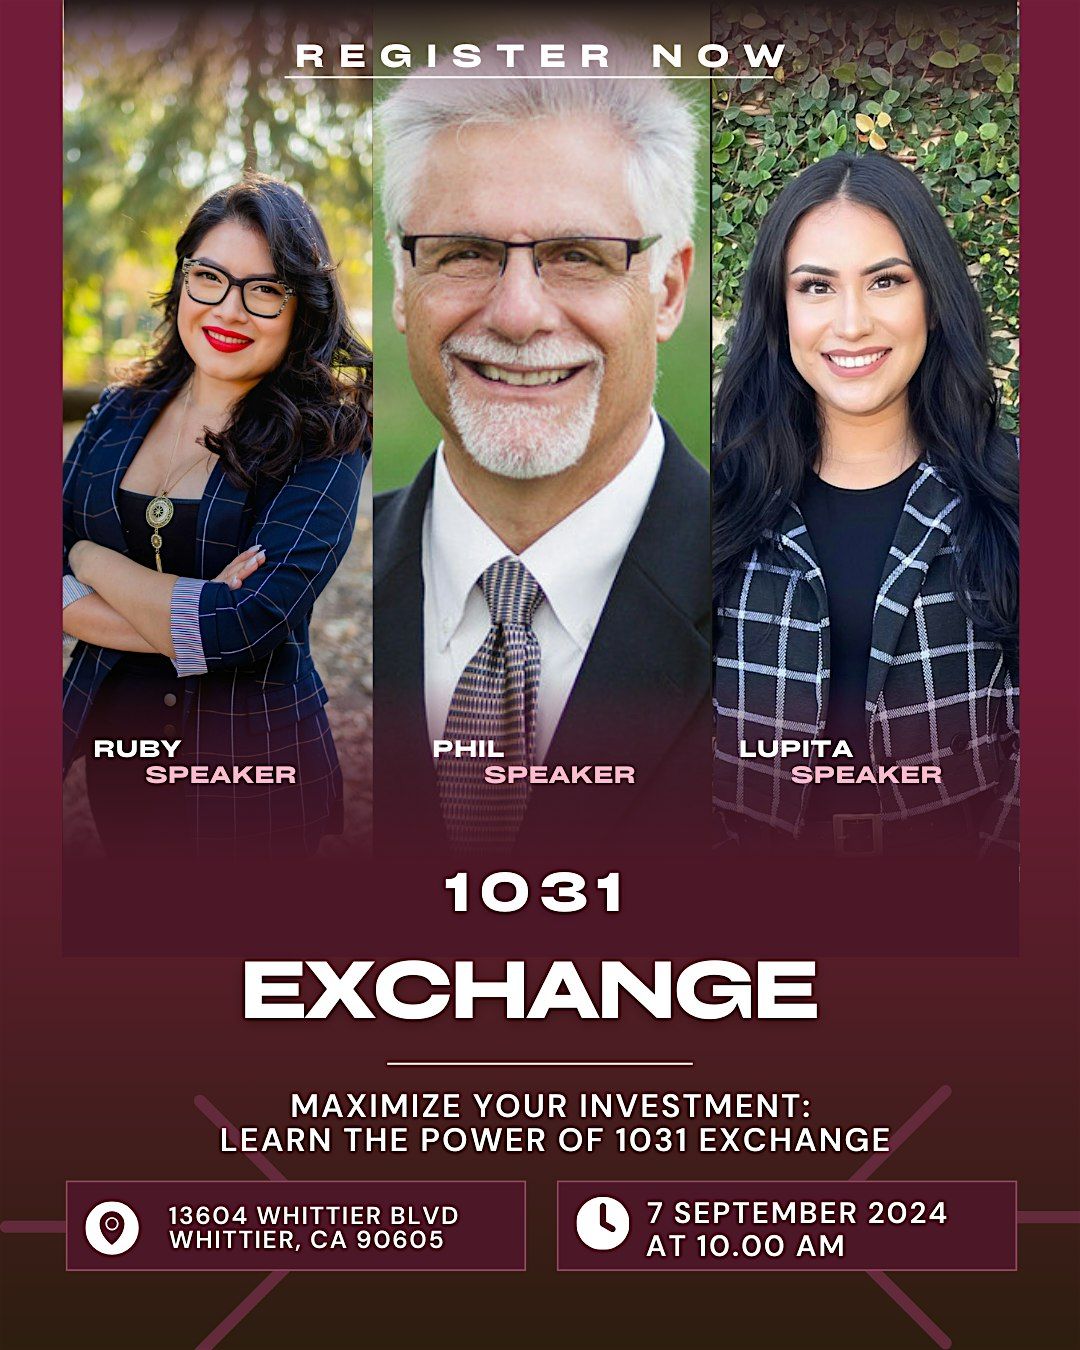 Maximize Your Investment: Learn the Power of 1031 Exchange